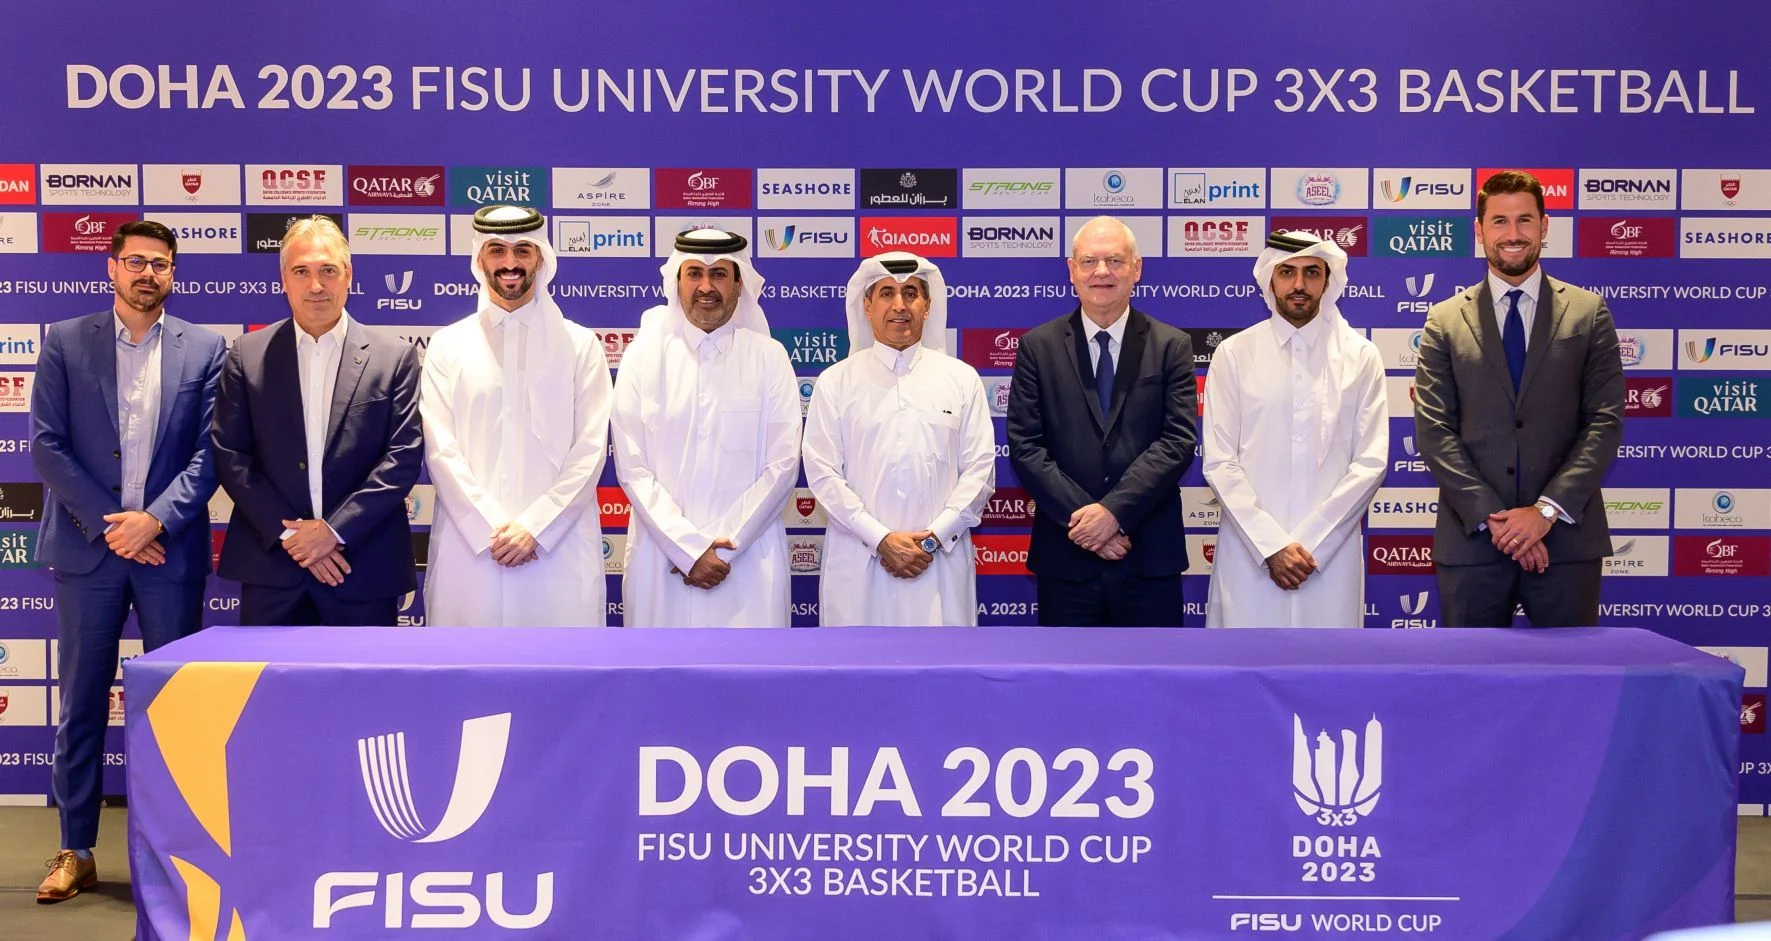 Doha to Host University World Cup 3x3 Basketball in 2023